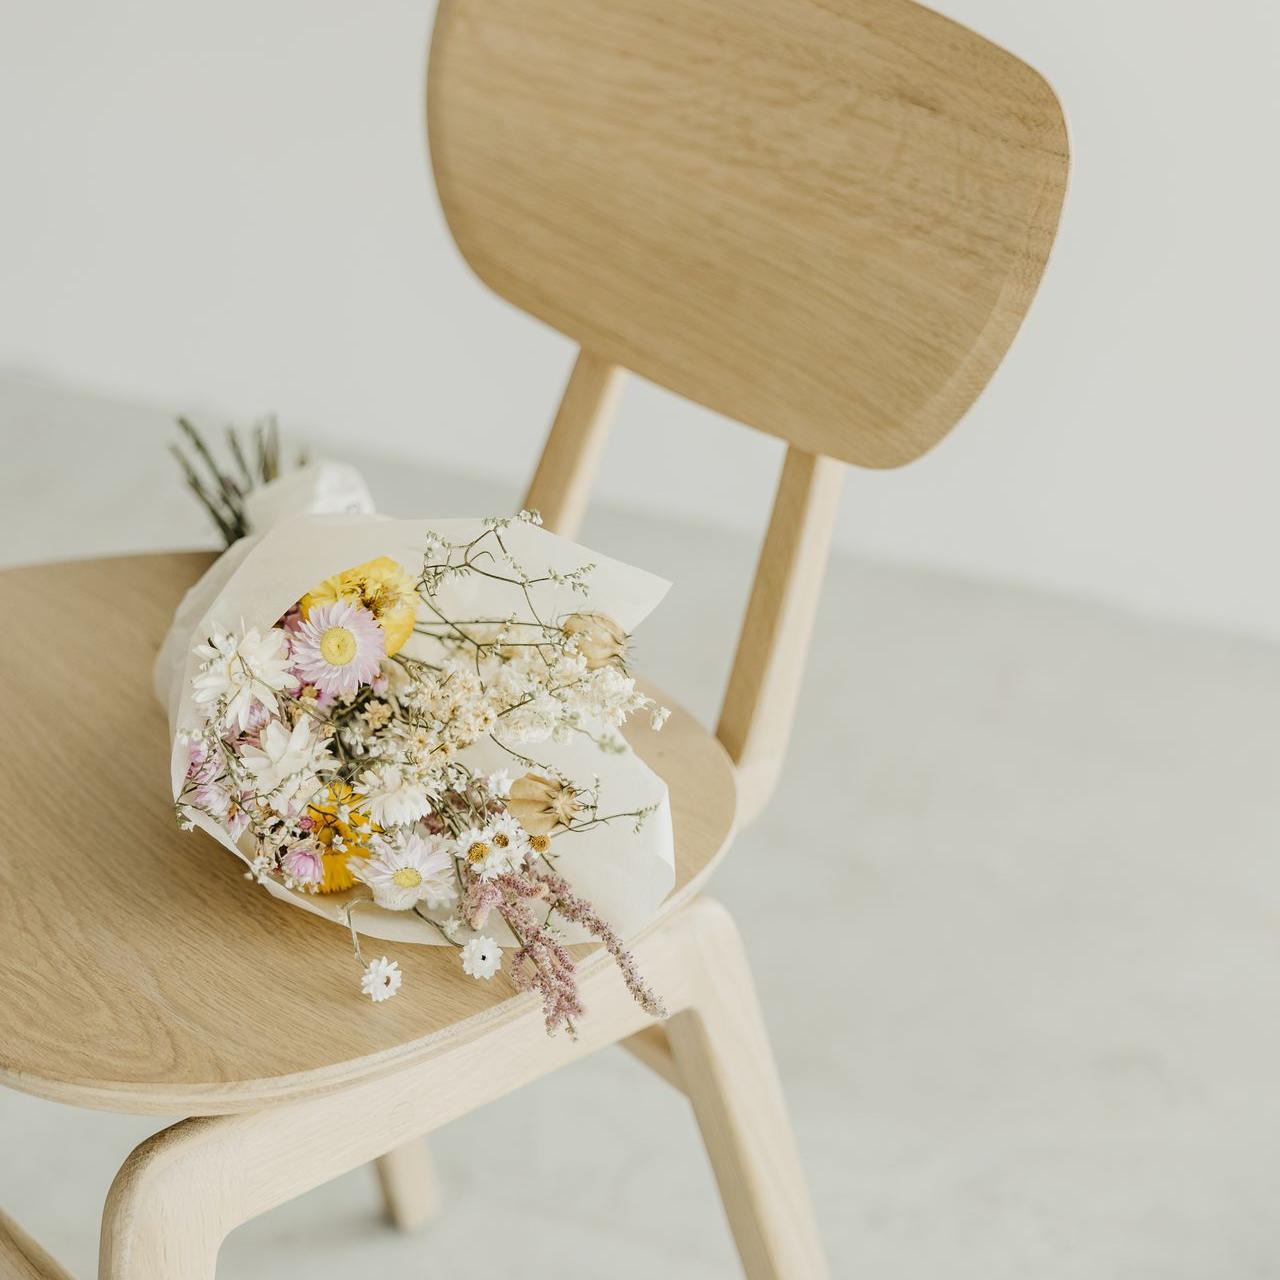 Flowers and Pebble dining chair | Live Light